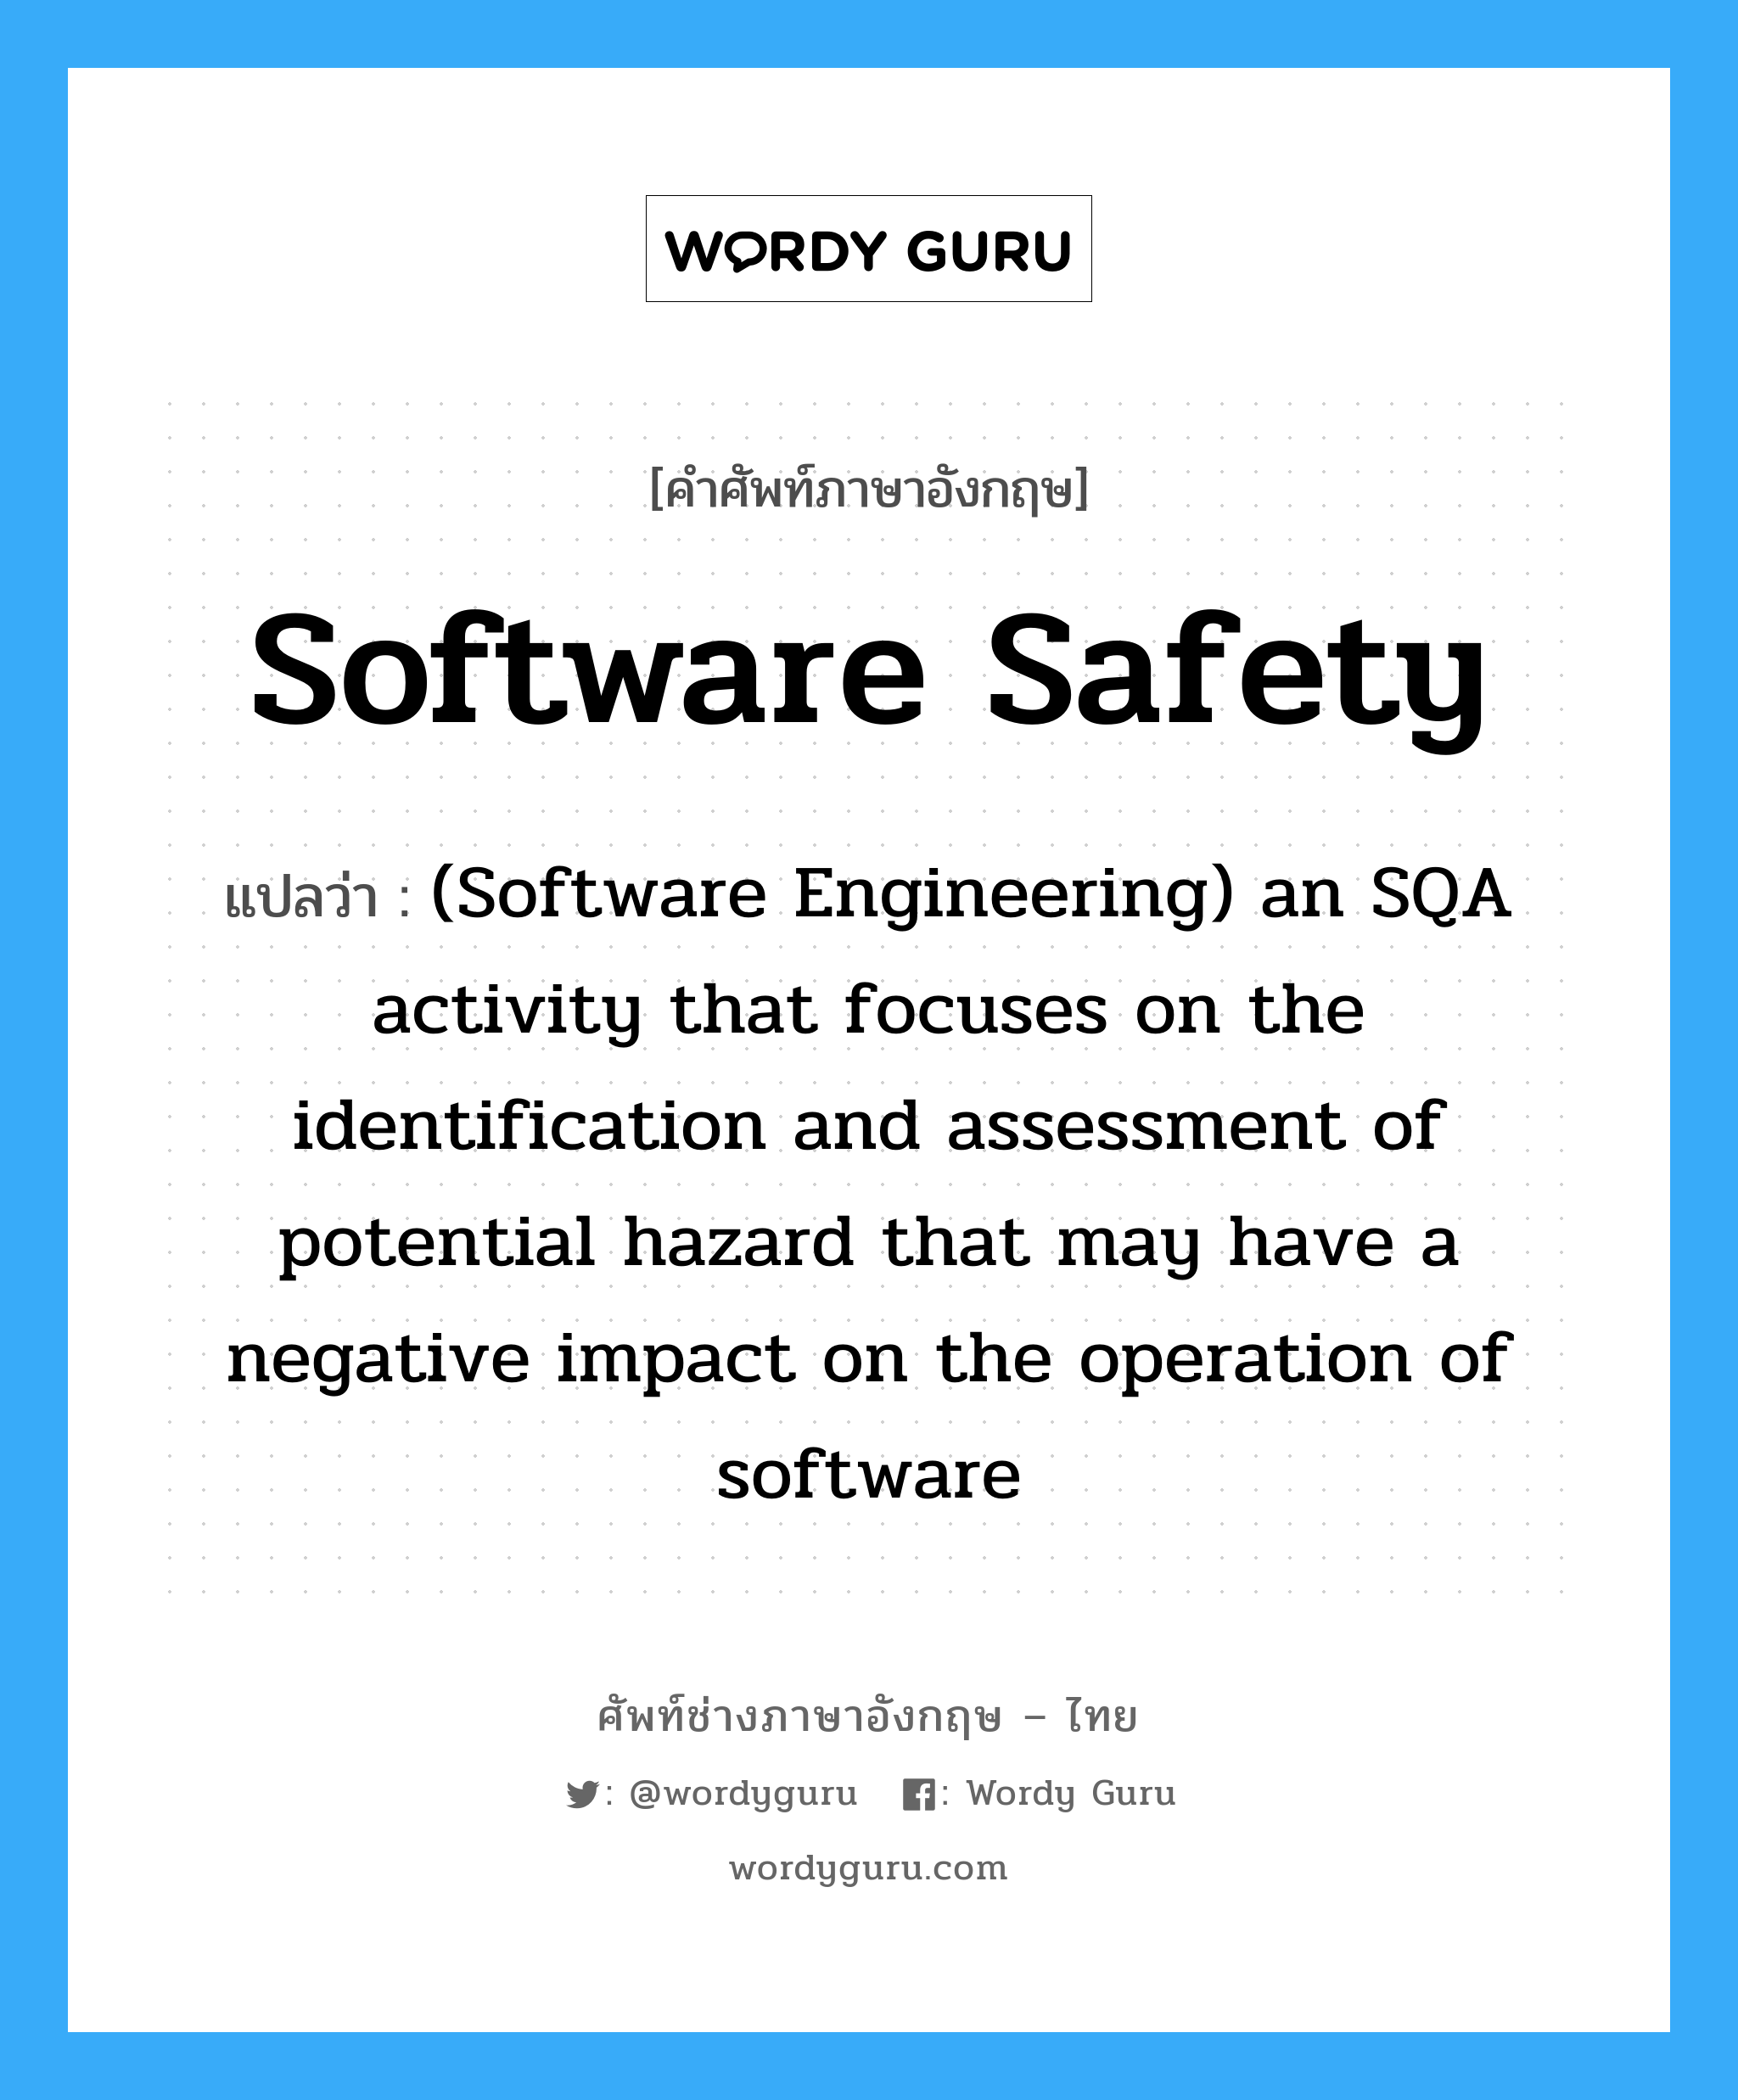 (Software Engineering) an SQA activity that focuses on the identification and assessment of potential hazard that may have a negative impact on the operation of software ภาษาอังกฤษ?, คำศัพท์ช่างภาษาอังกฤษ - ไทย (Software Engineering) an SQA activity that focuses on the identification and assessment of potential hazard that may have a negative impact on the operation of software คำศัพท์ภาษาอังกฤษ (Software Engineering) an SQA activity that focuses on the identification and assessment of potential hazard that may have a negative impact on the operation of software แปลว่า Software safety